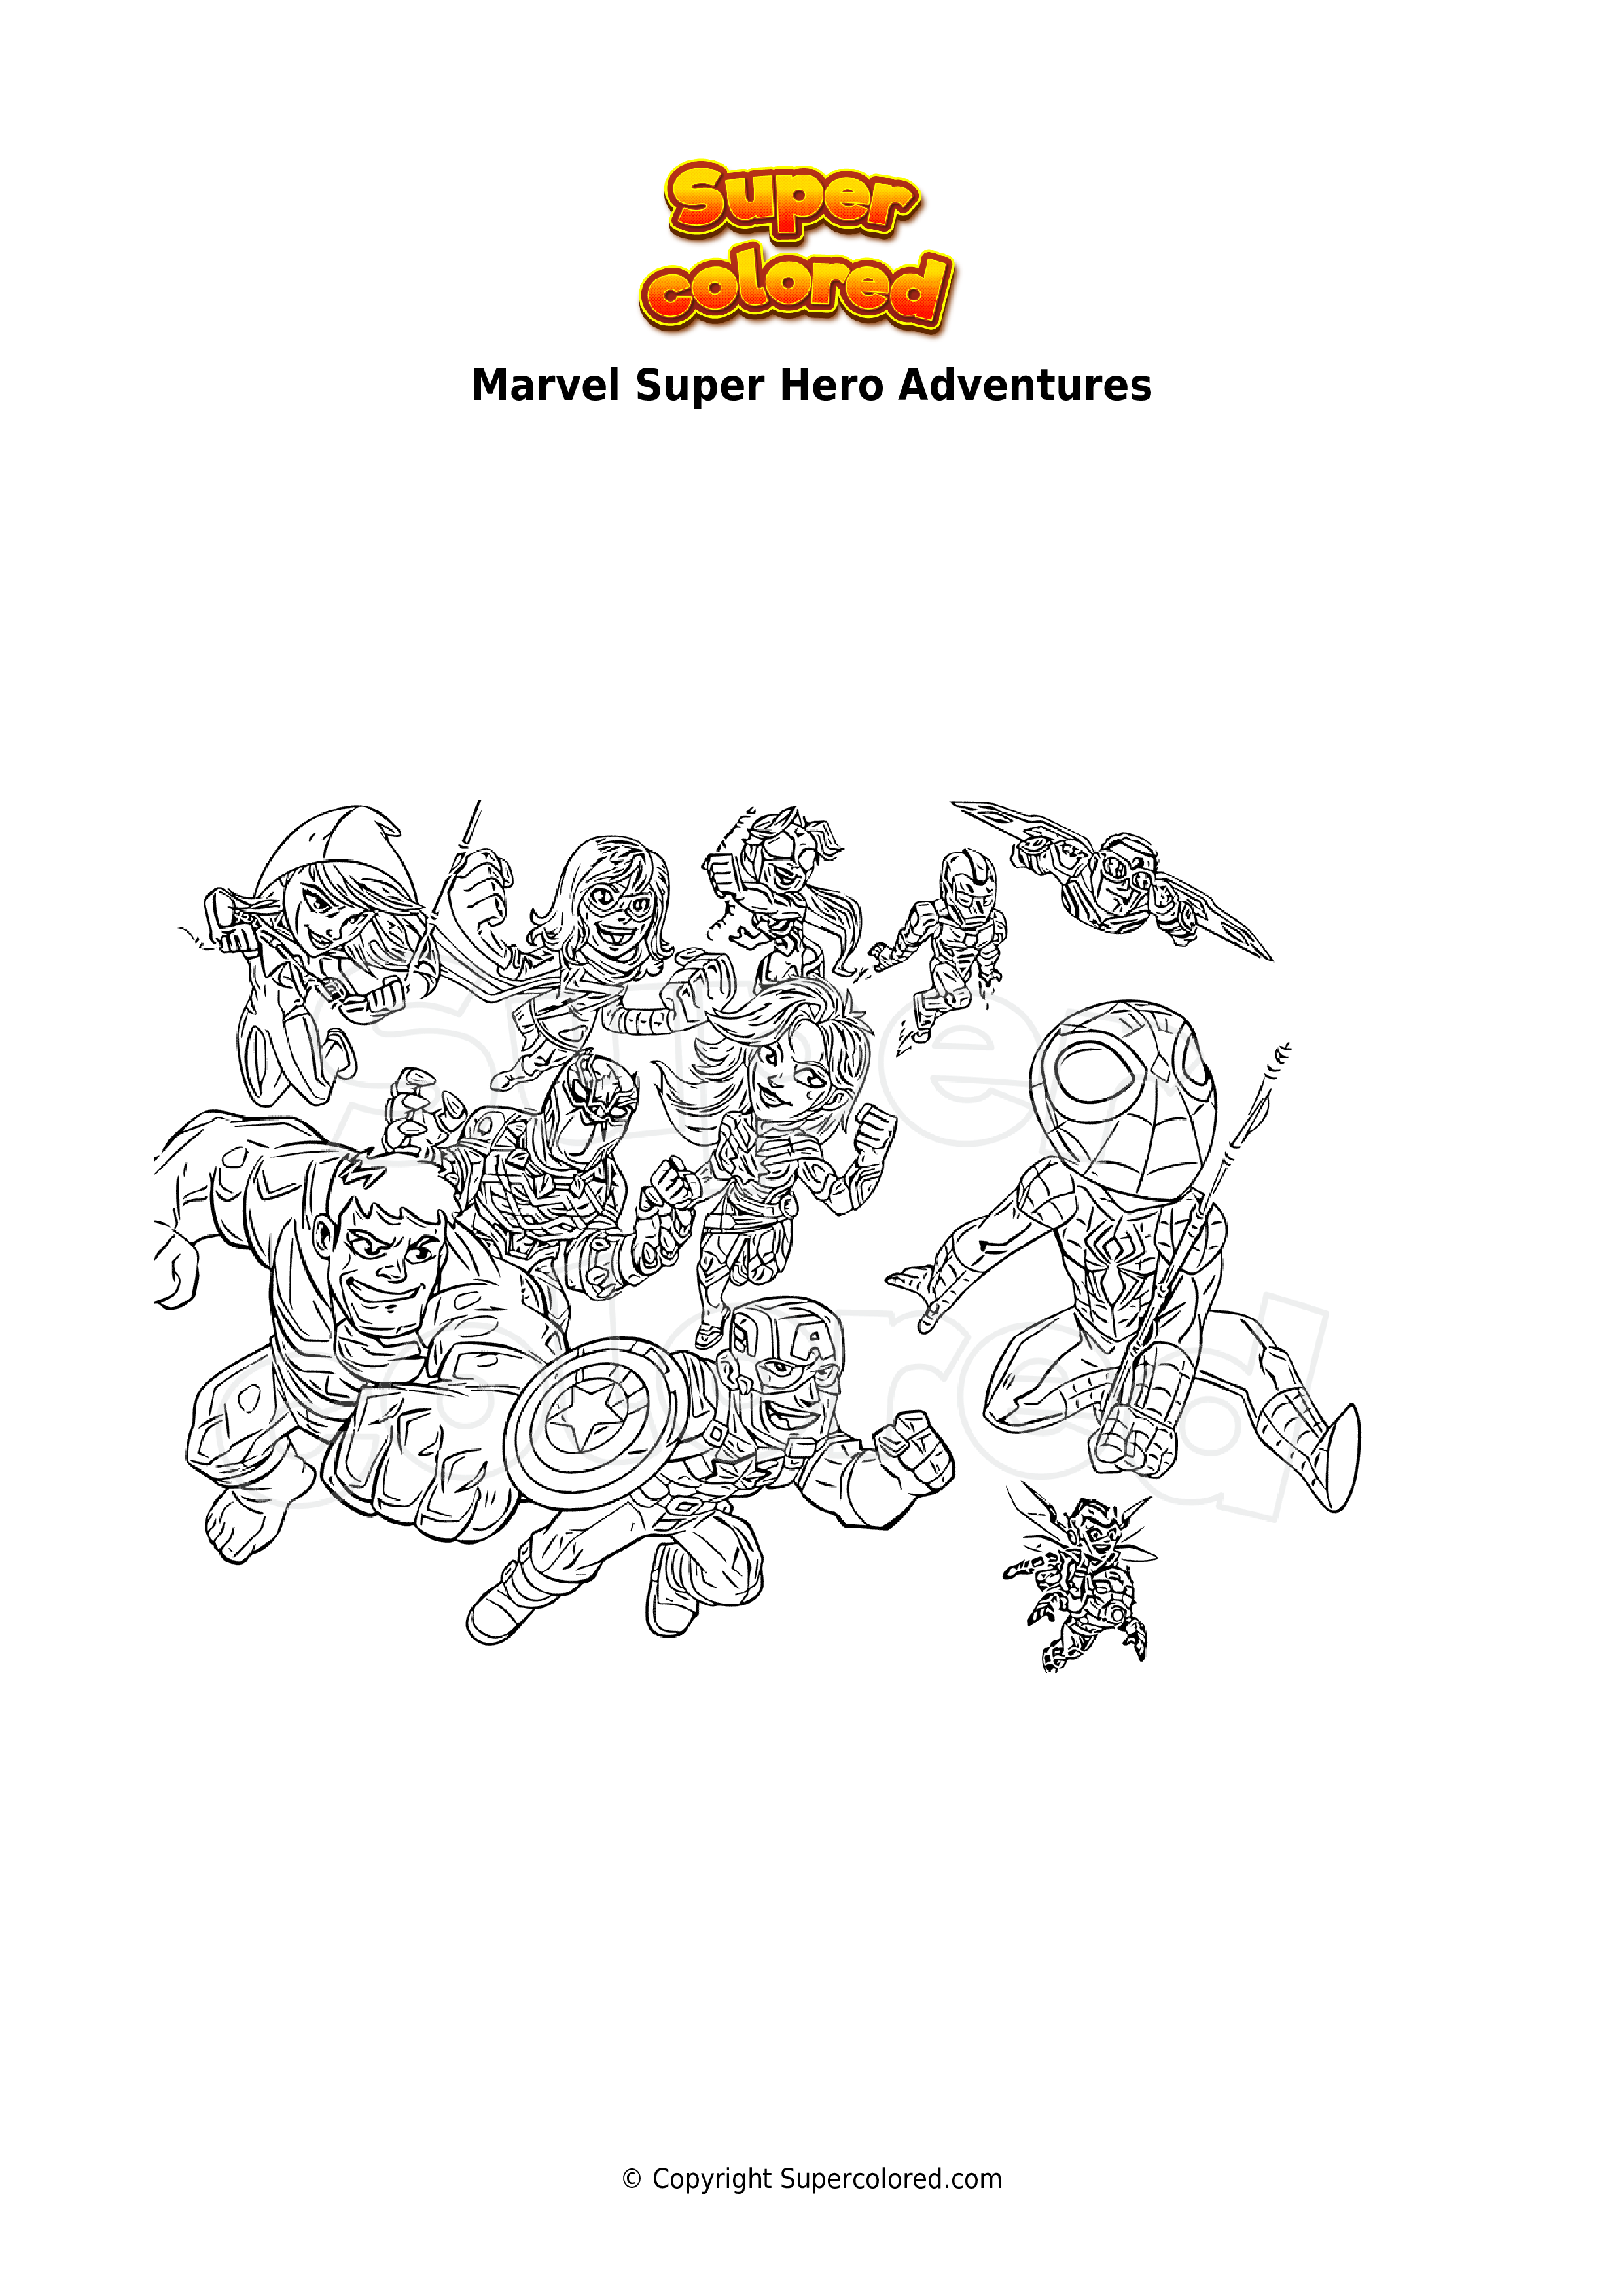 Coloring page Marvel Super Hero Adventures - Supercolored.com